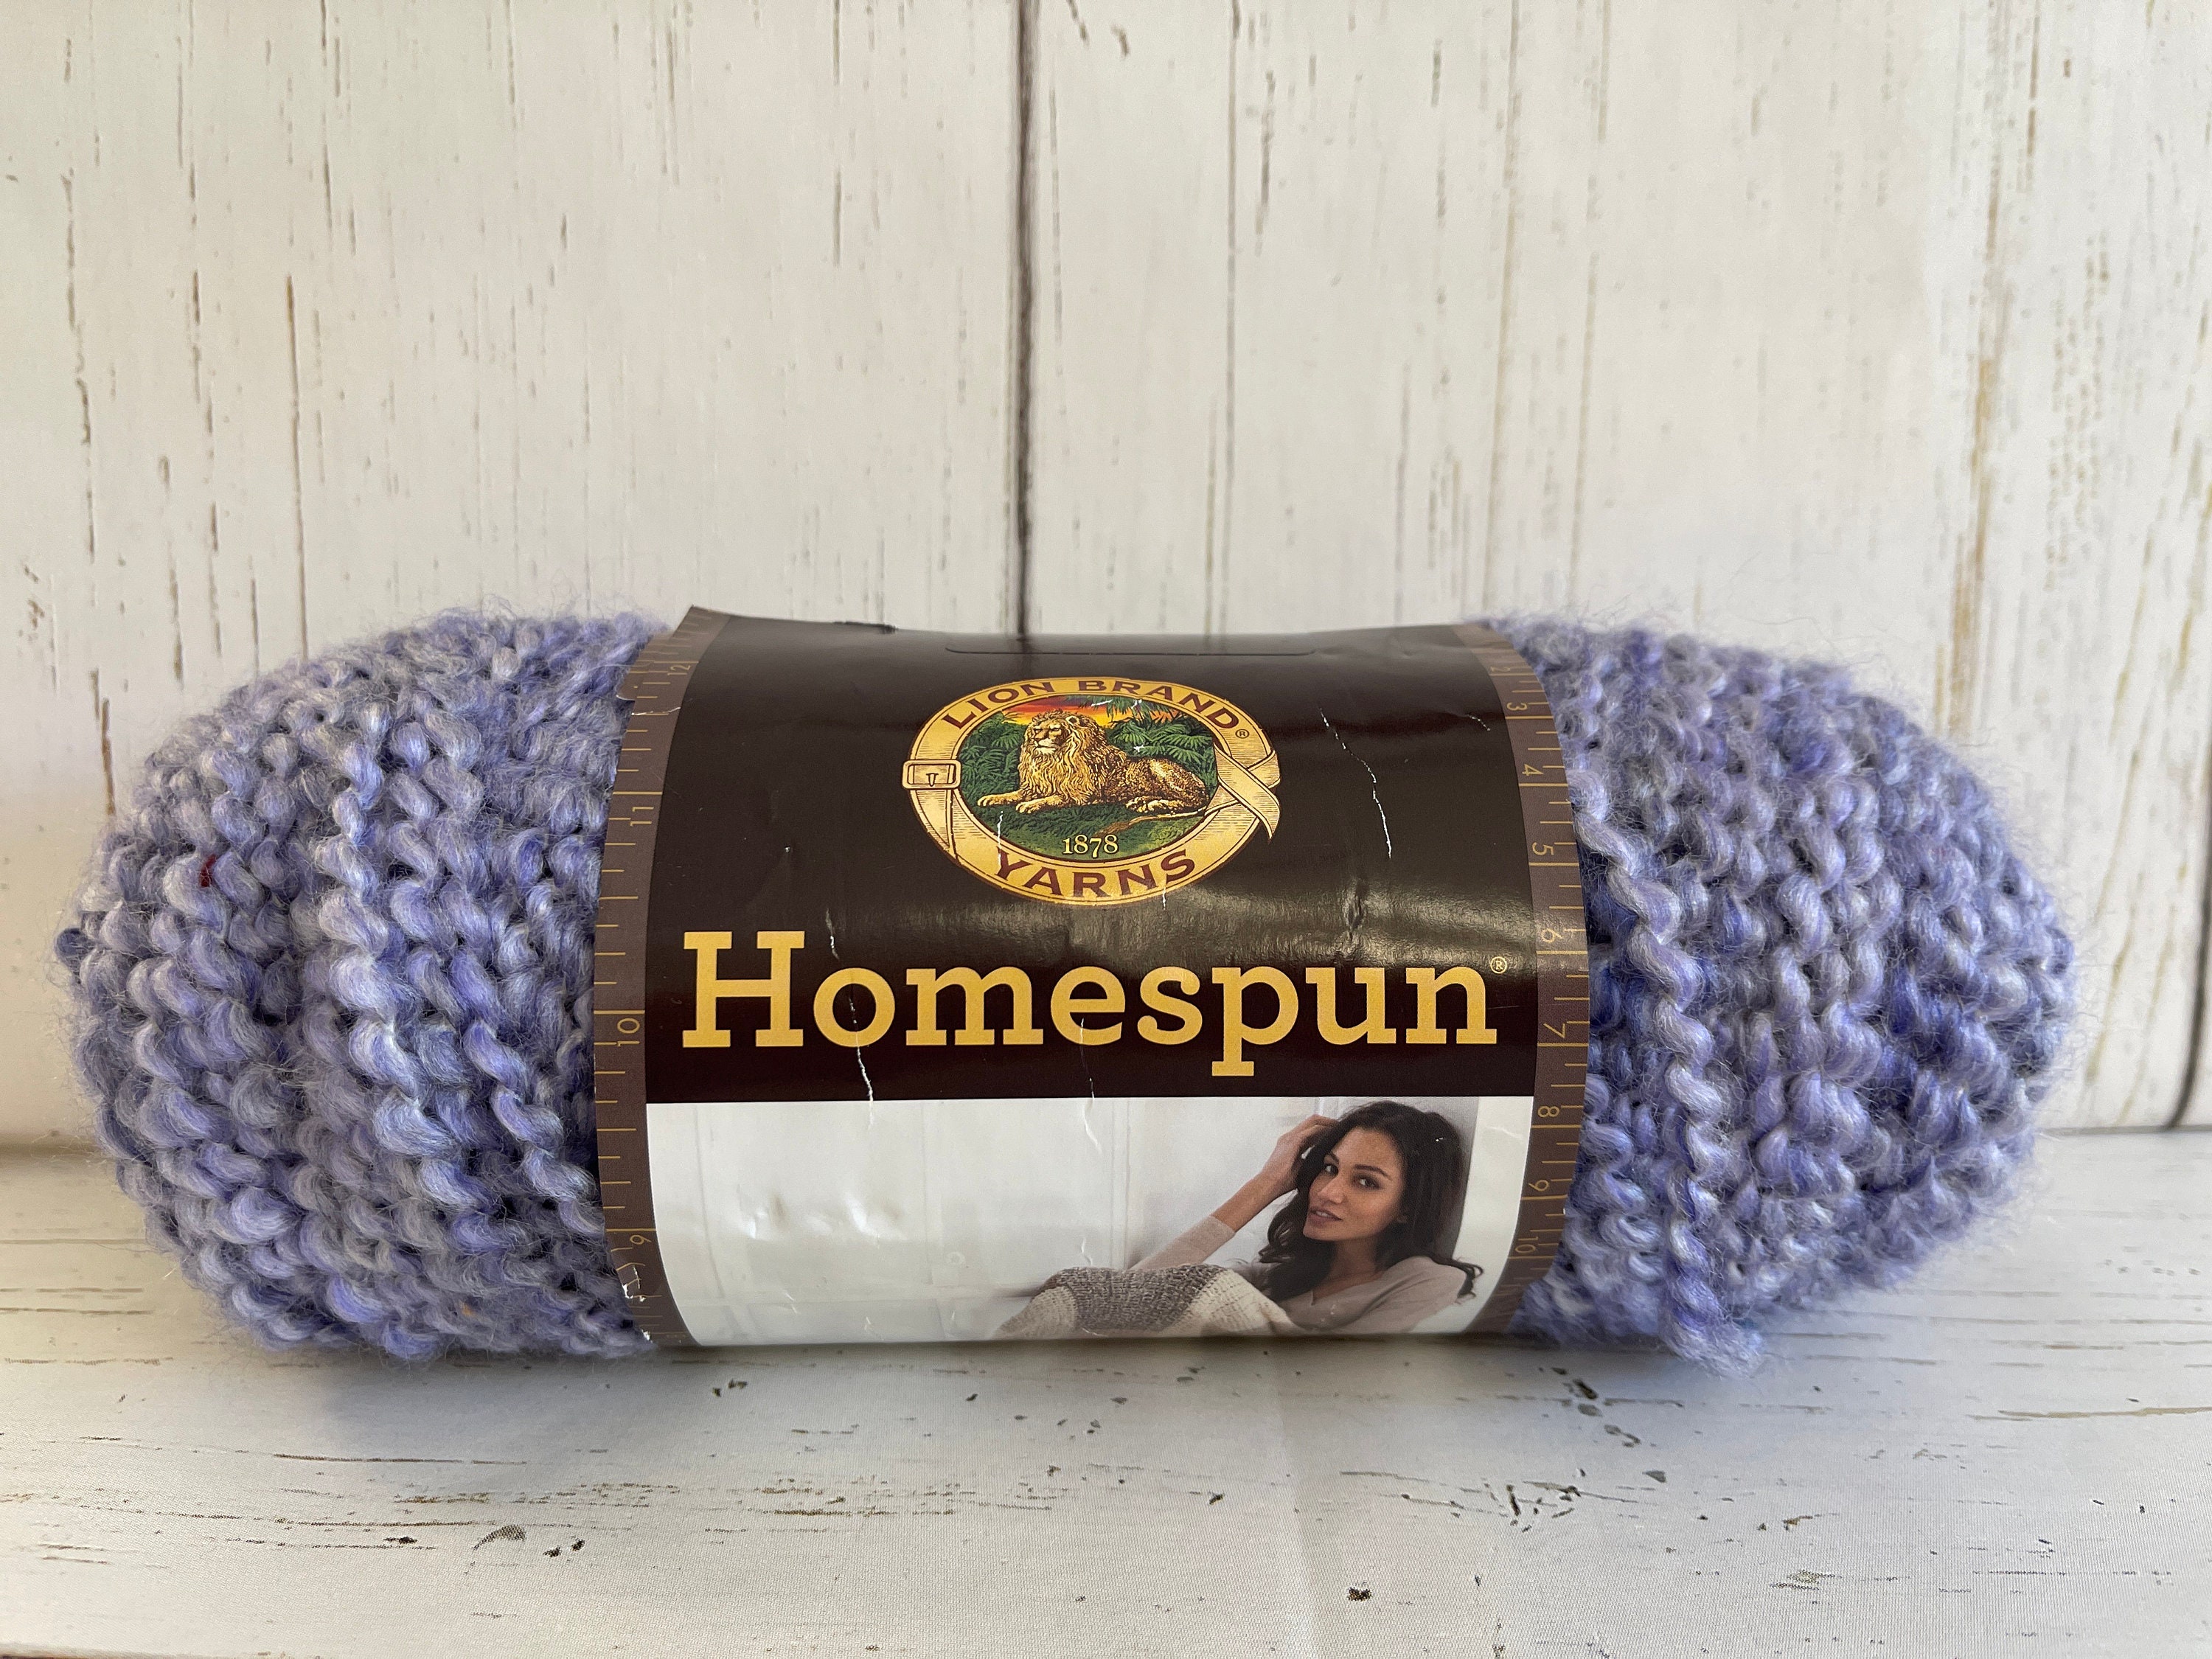 Lion Brand® Yarn Homespun Choose Your Color, New and Pre Loved Skeins -   Finland